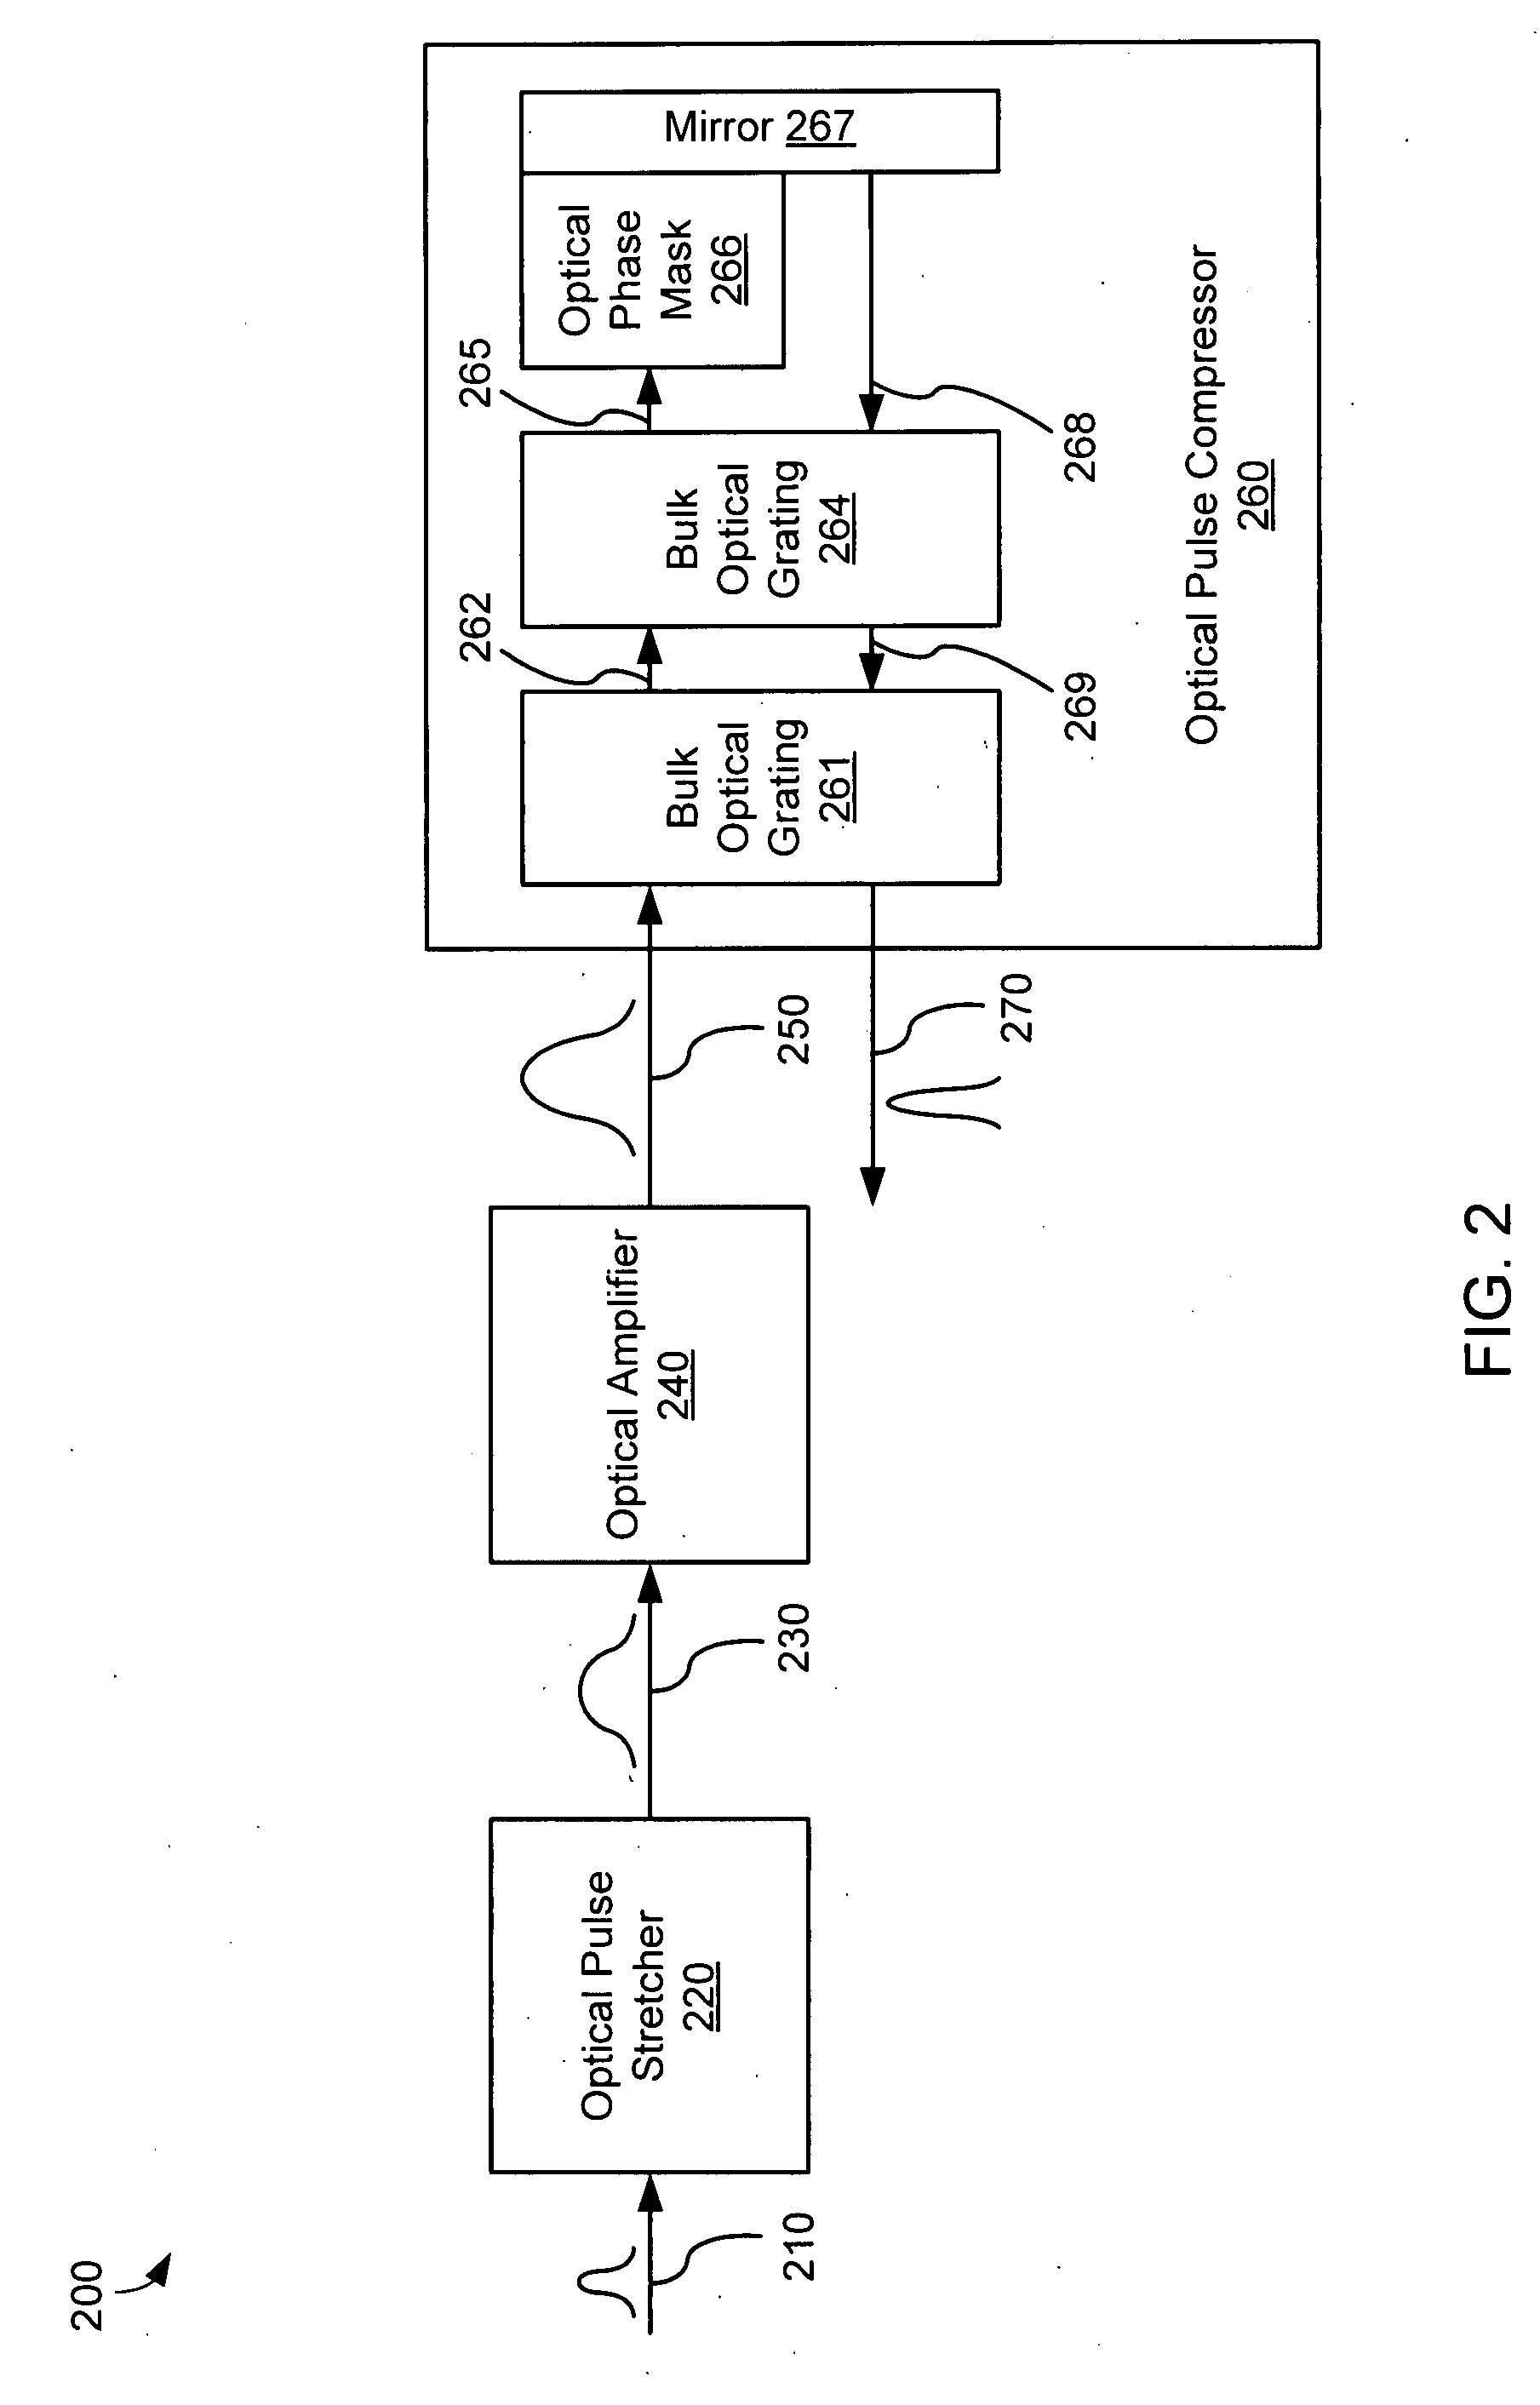 Static phase mask for high-order spectral phase control in a hybrid chirped pulse amplifier system